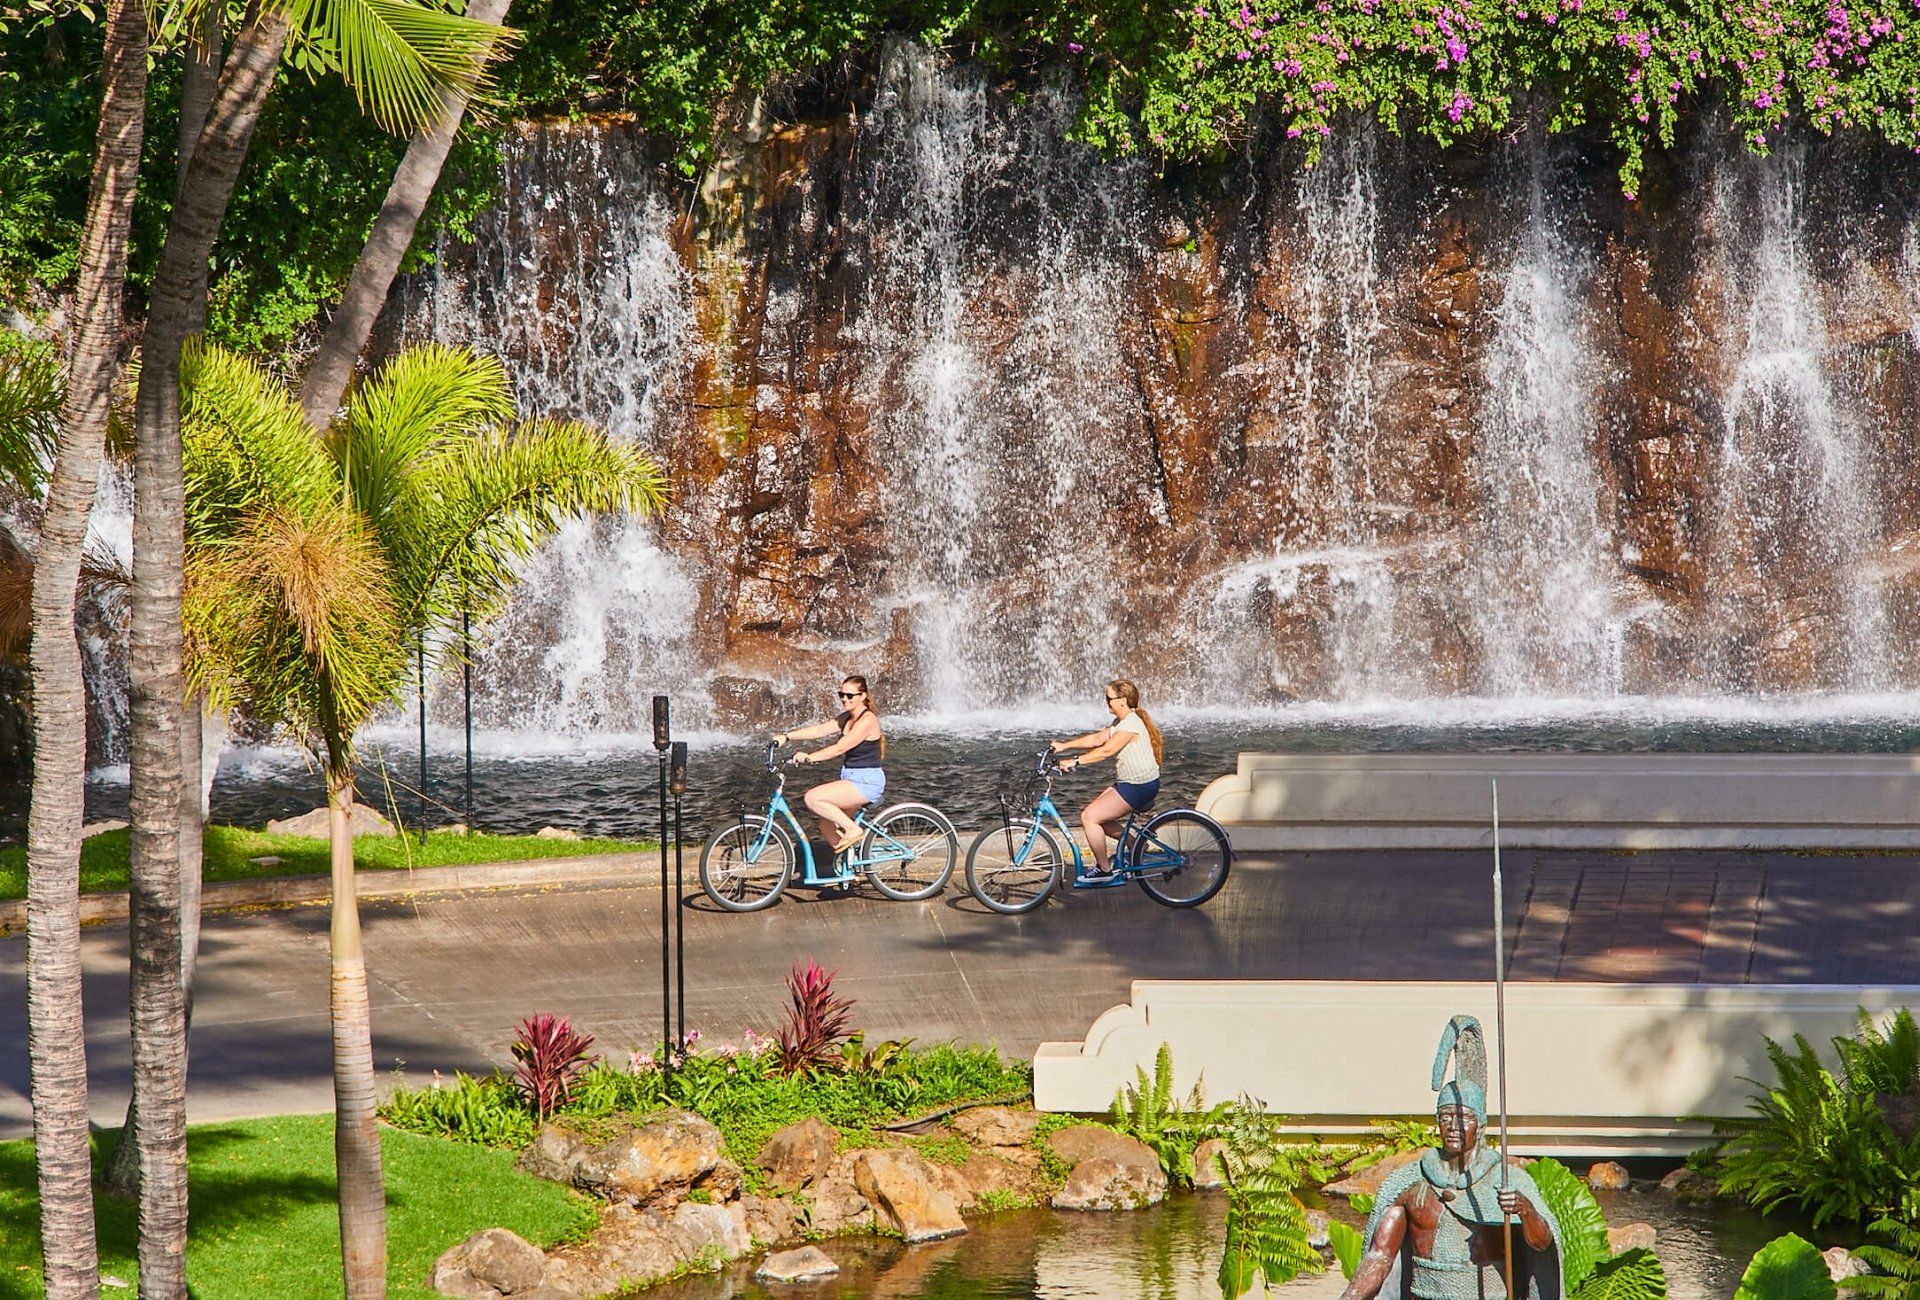 two people ride beach cruiser bikes along a path beside a wall of water